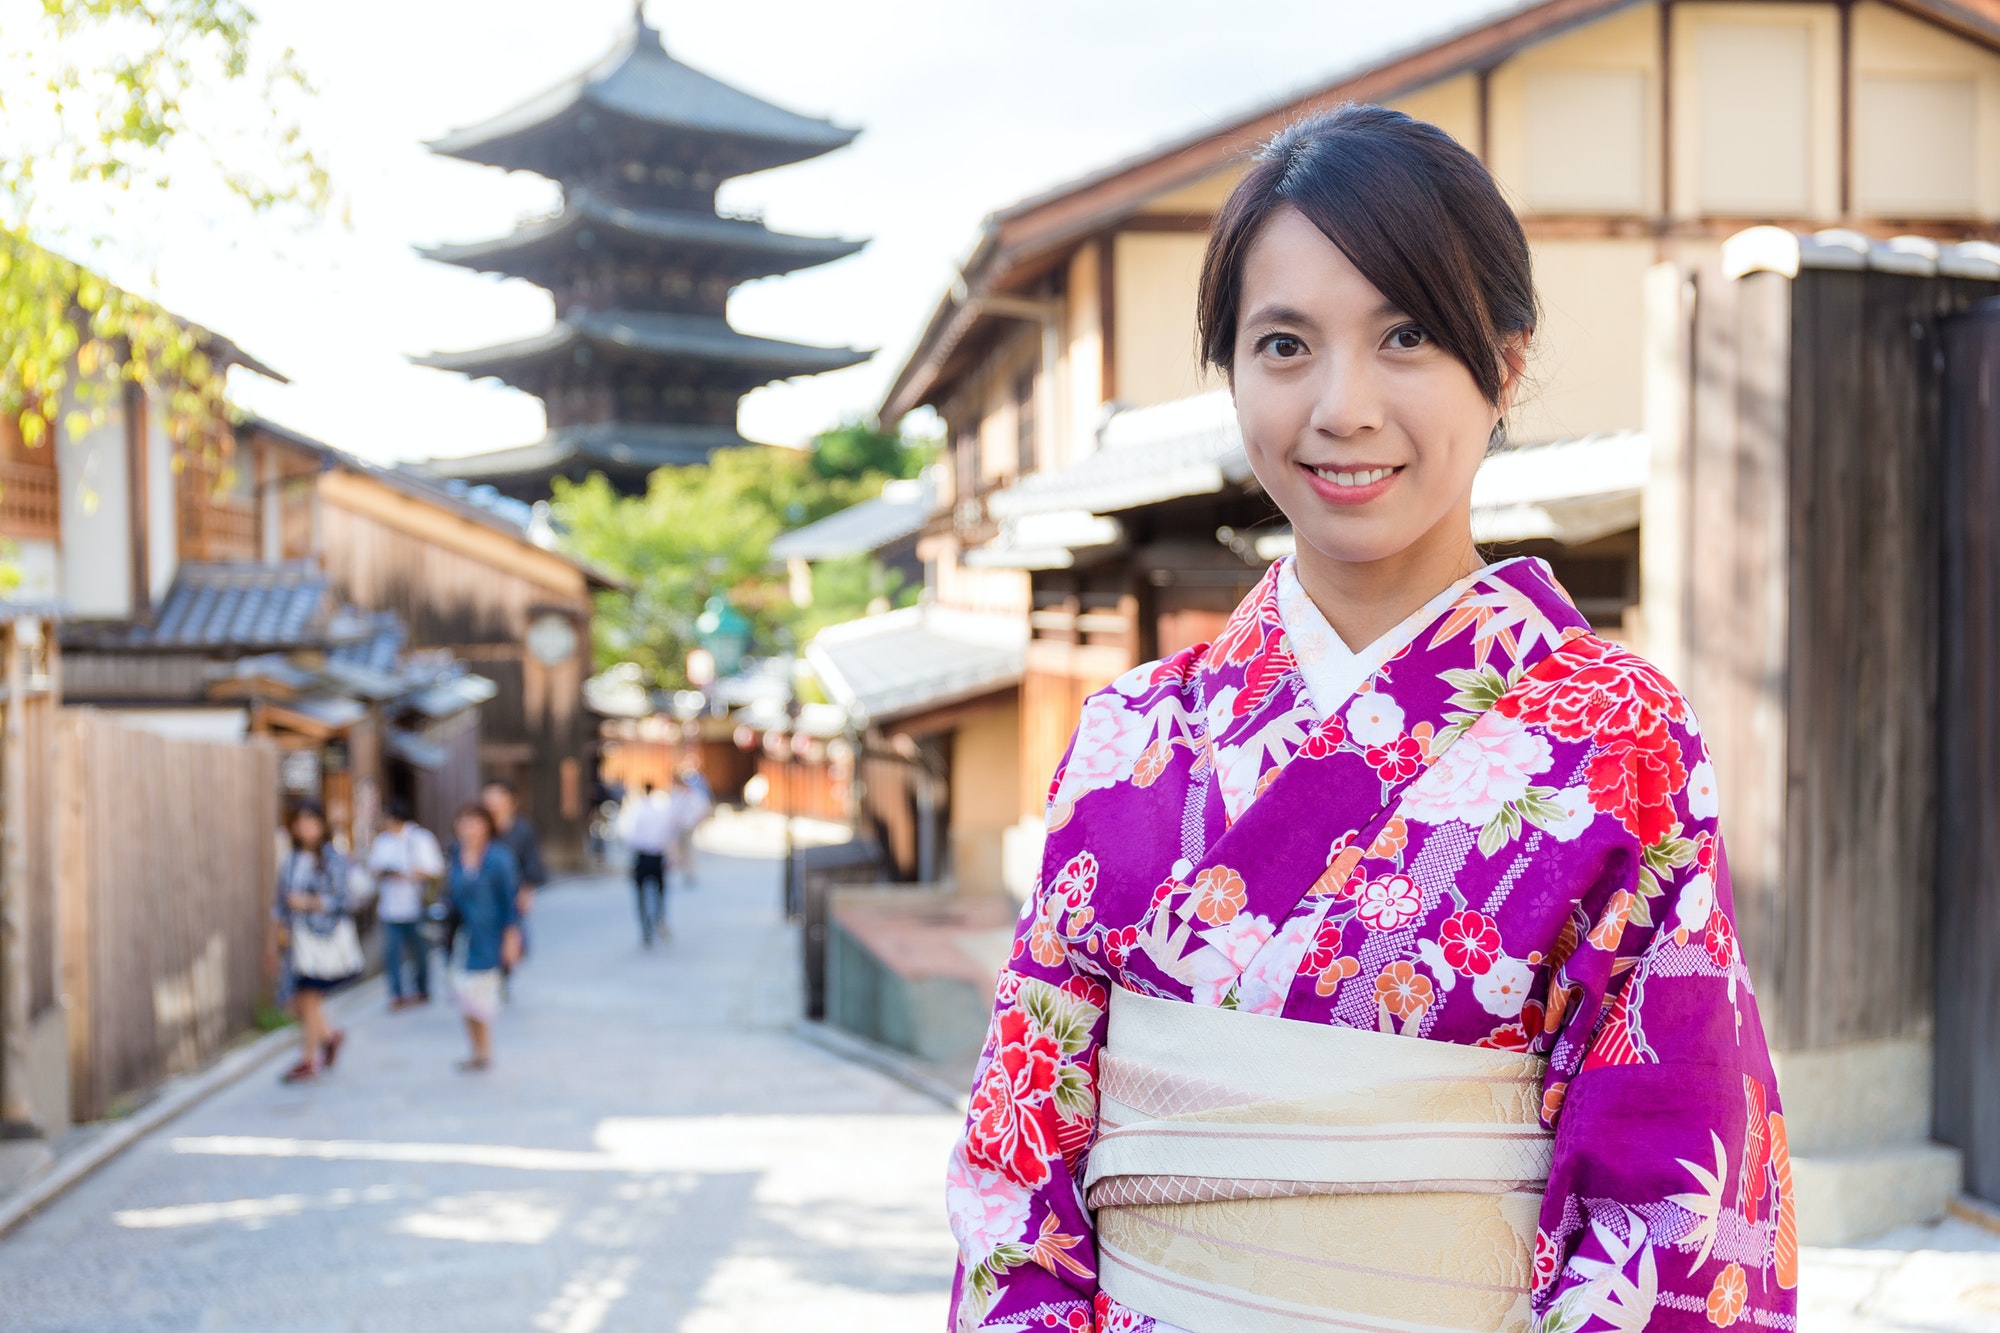 Woman with traditional japanese dress in Kyoto